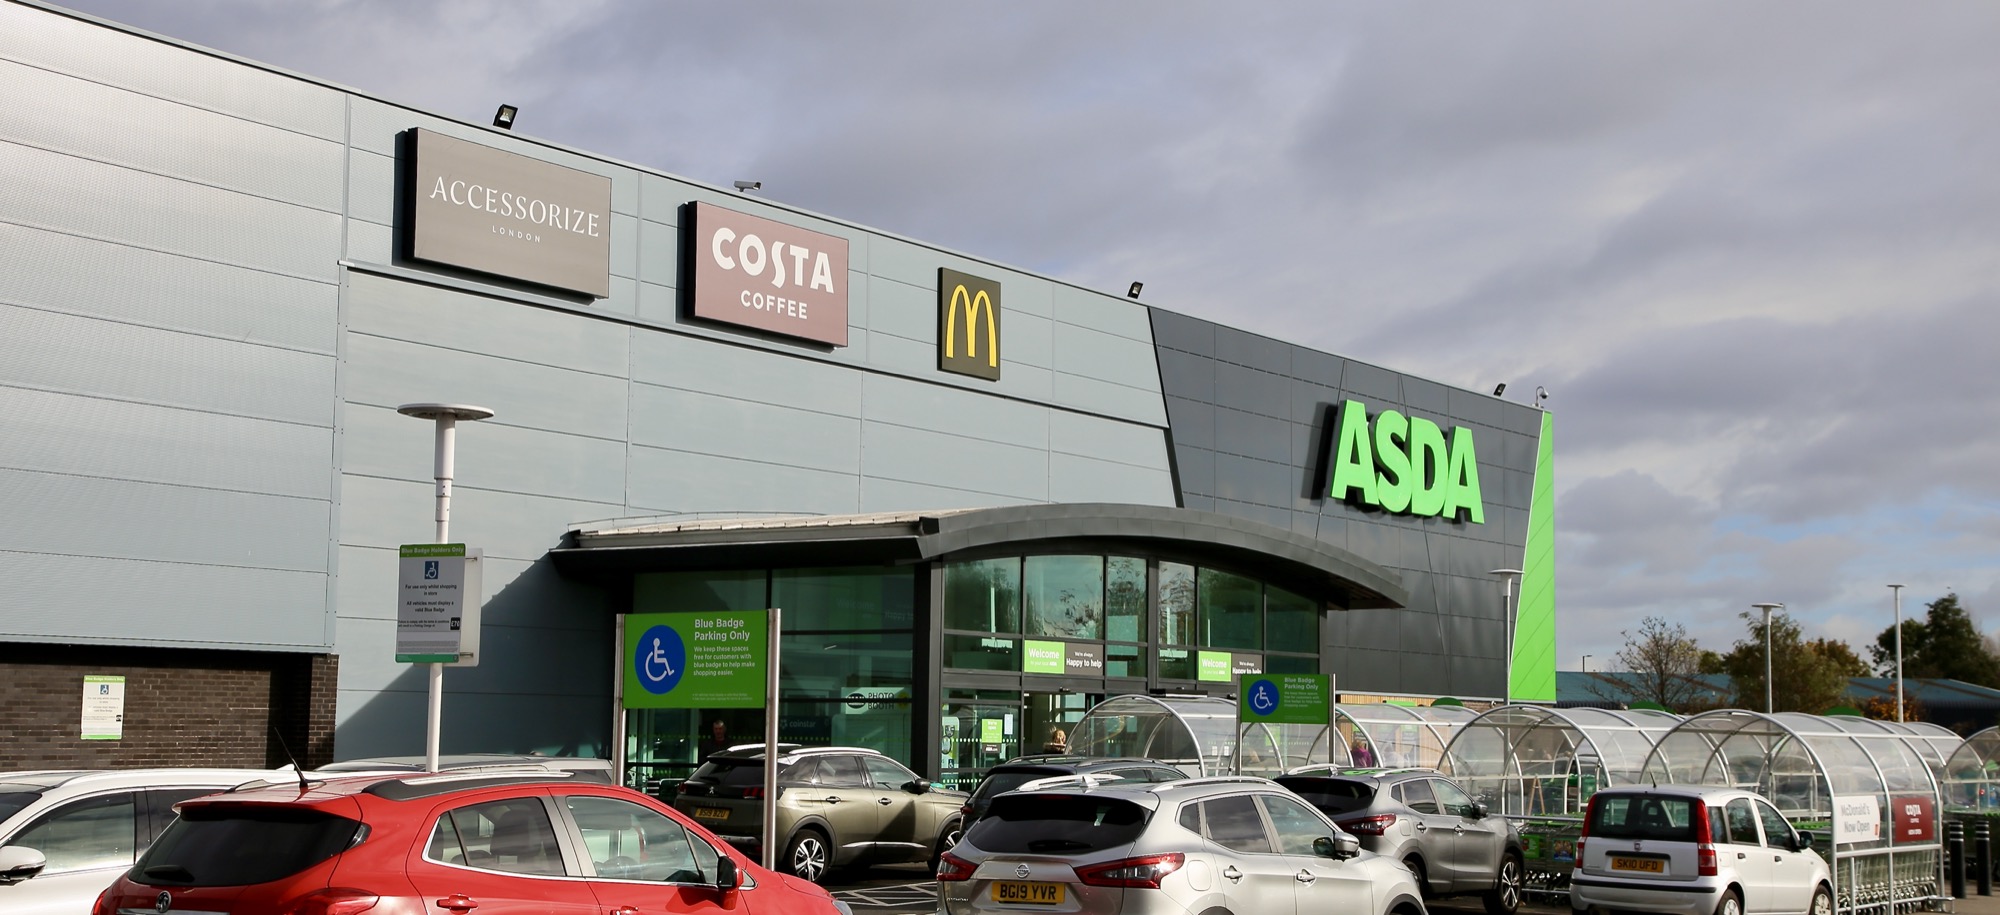 Asda, Accessorize, Cost Coffee and Mcdonalds Signage